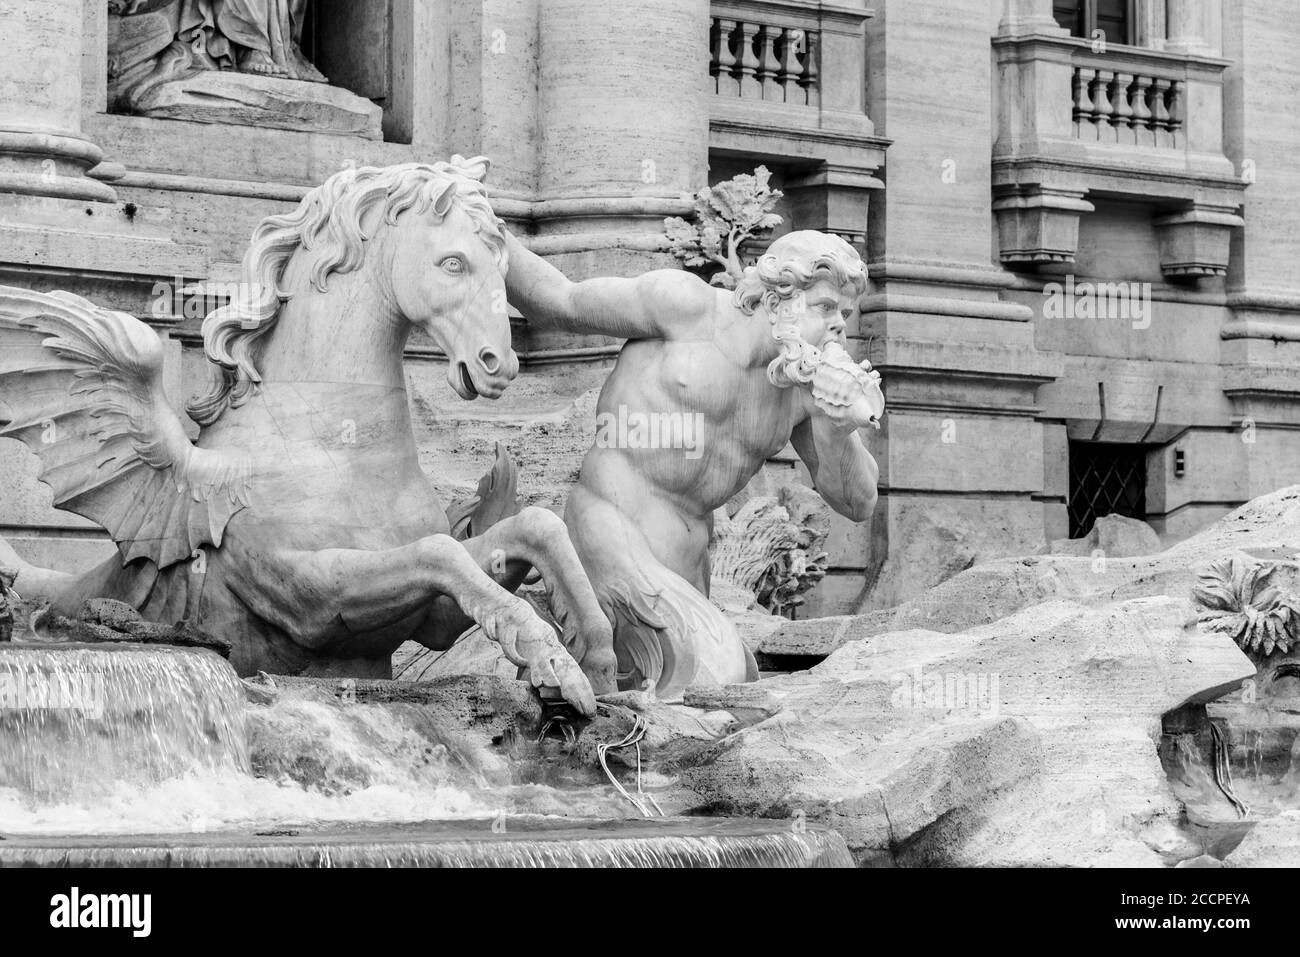 White marble statue of Triton with docile horse, part of Trevi Fountain, Rome, Italy. Black and white image. Stock Photo